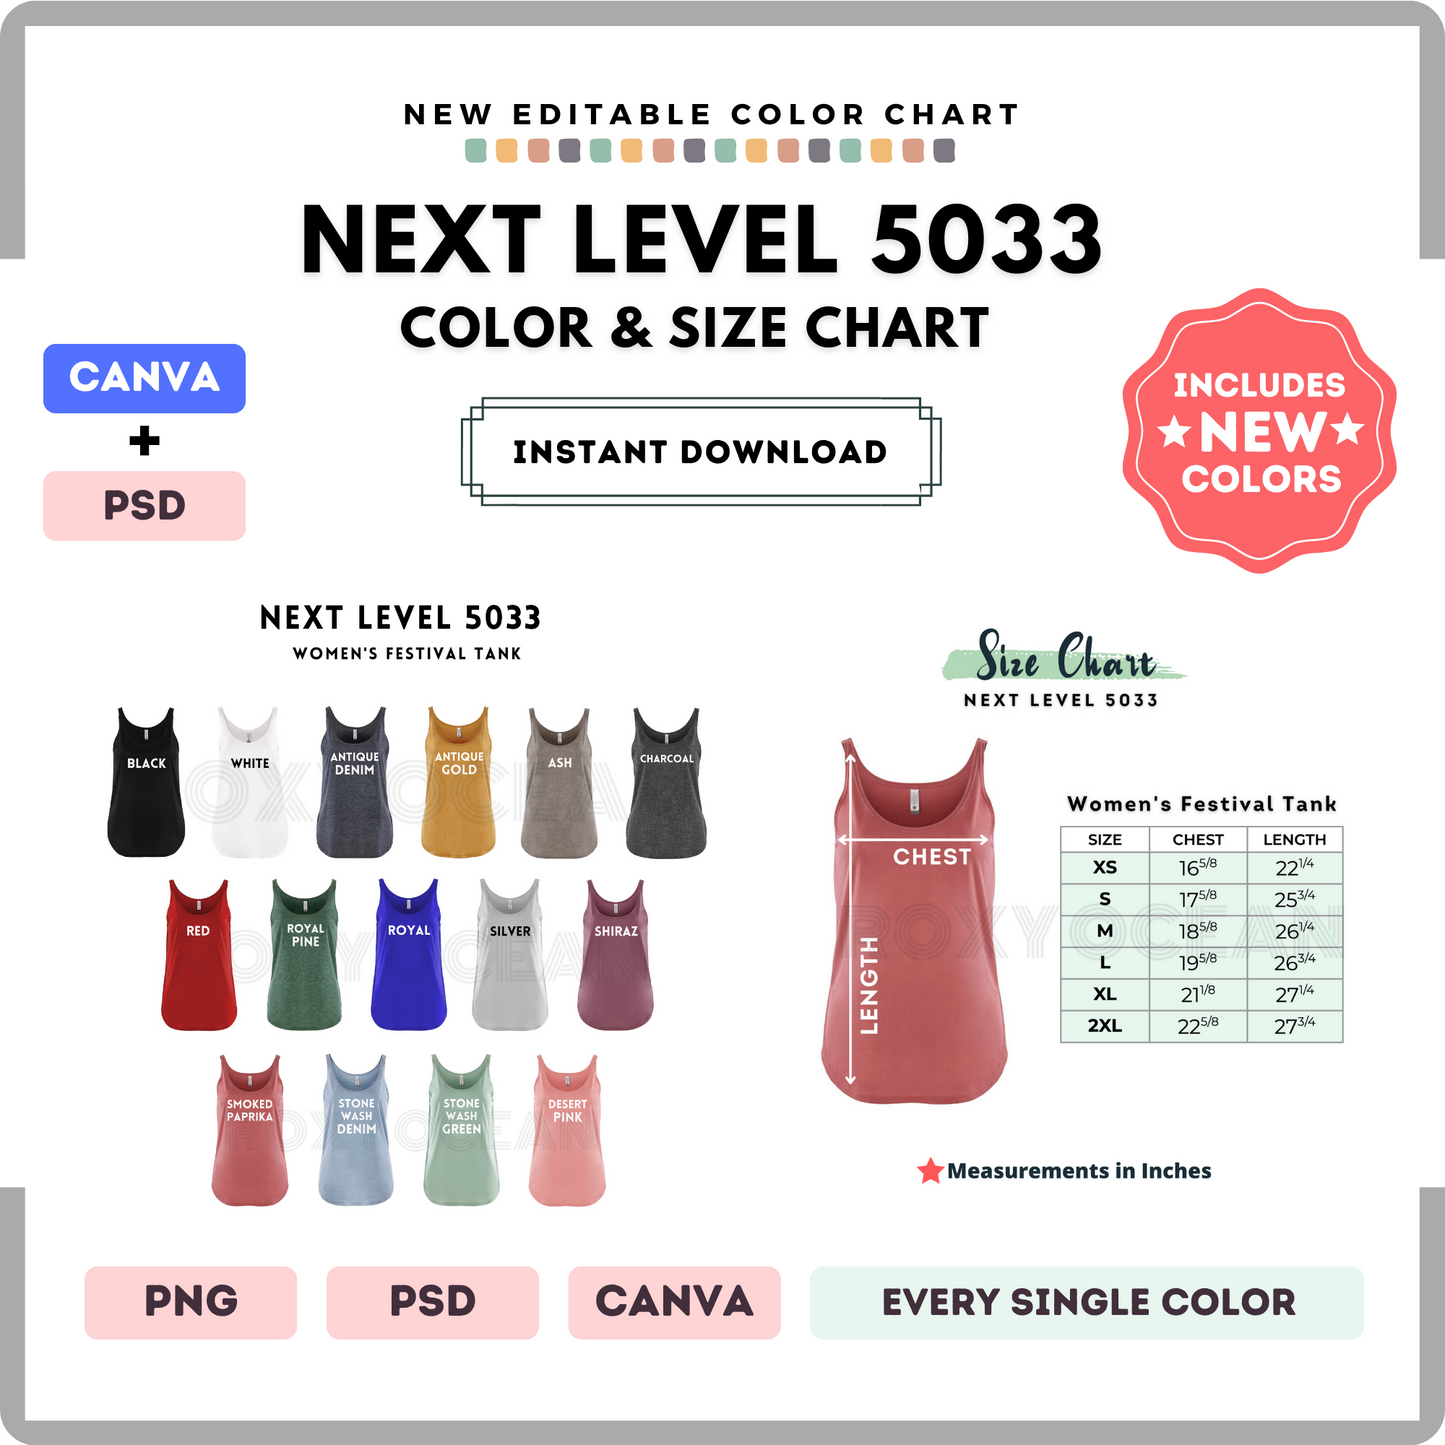 Next Level 5033 Color and Size Chart